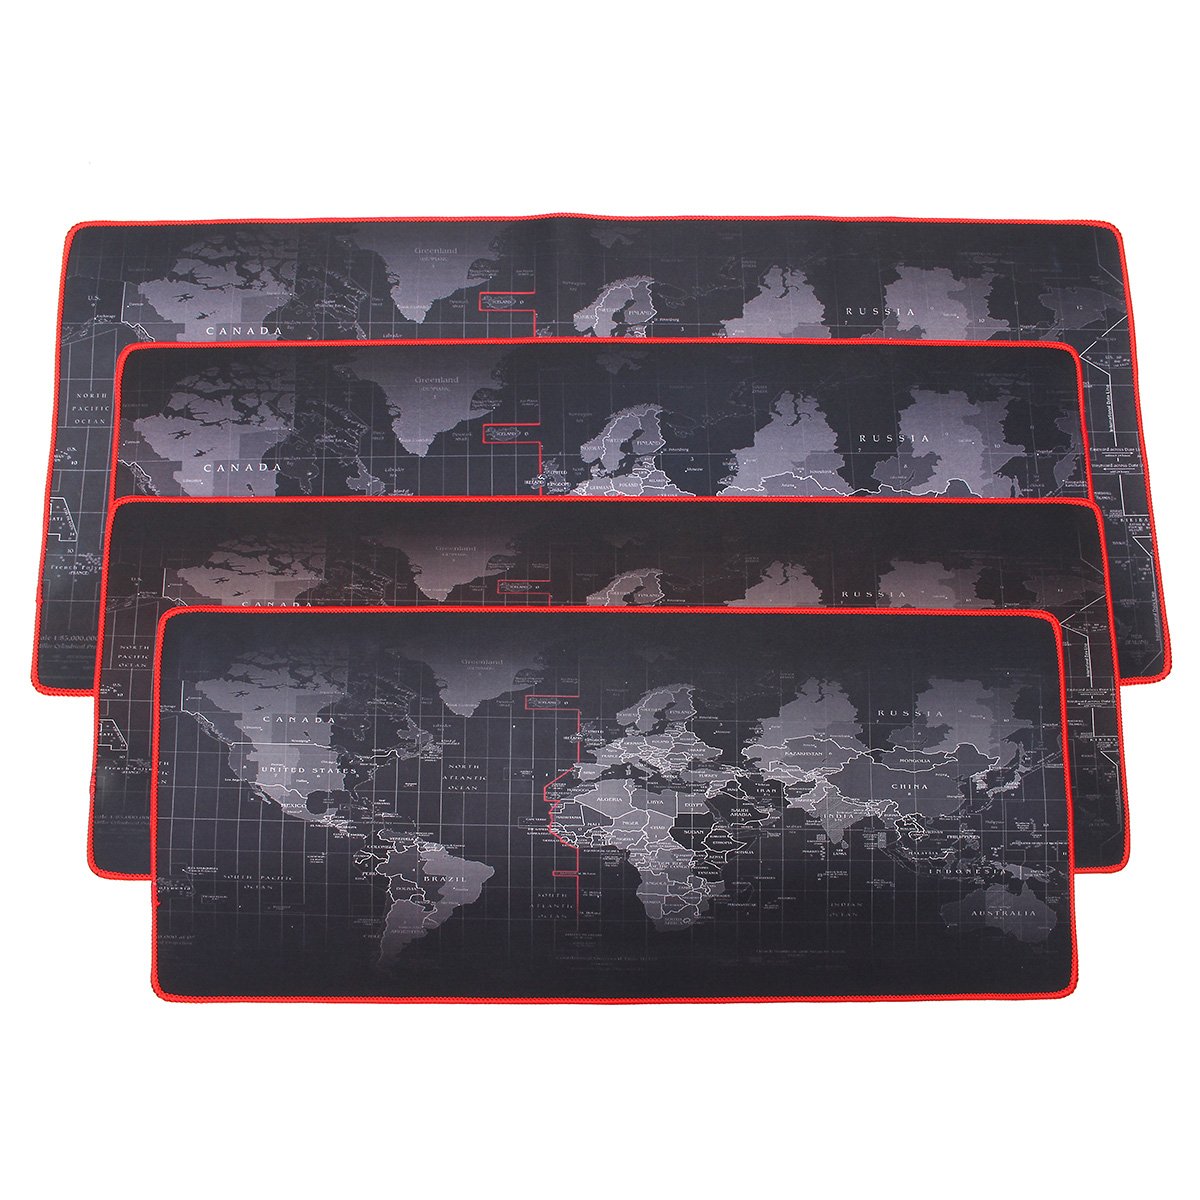 2mm Large Non-Slip World Map Game Mouse Pad Mat with Red Hem For PC Laptop Computer Keyboard 1